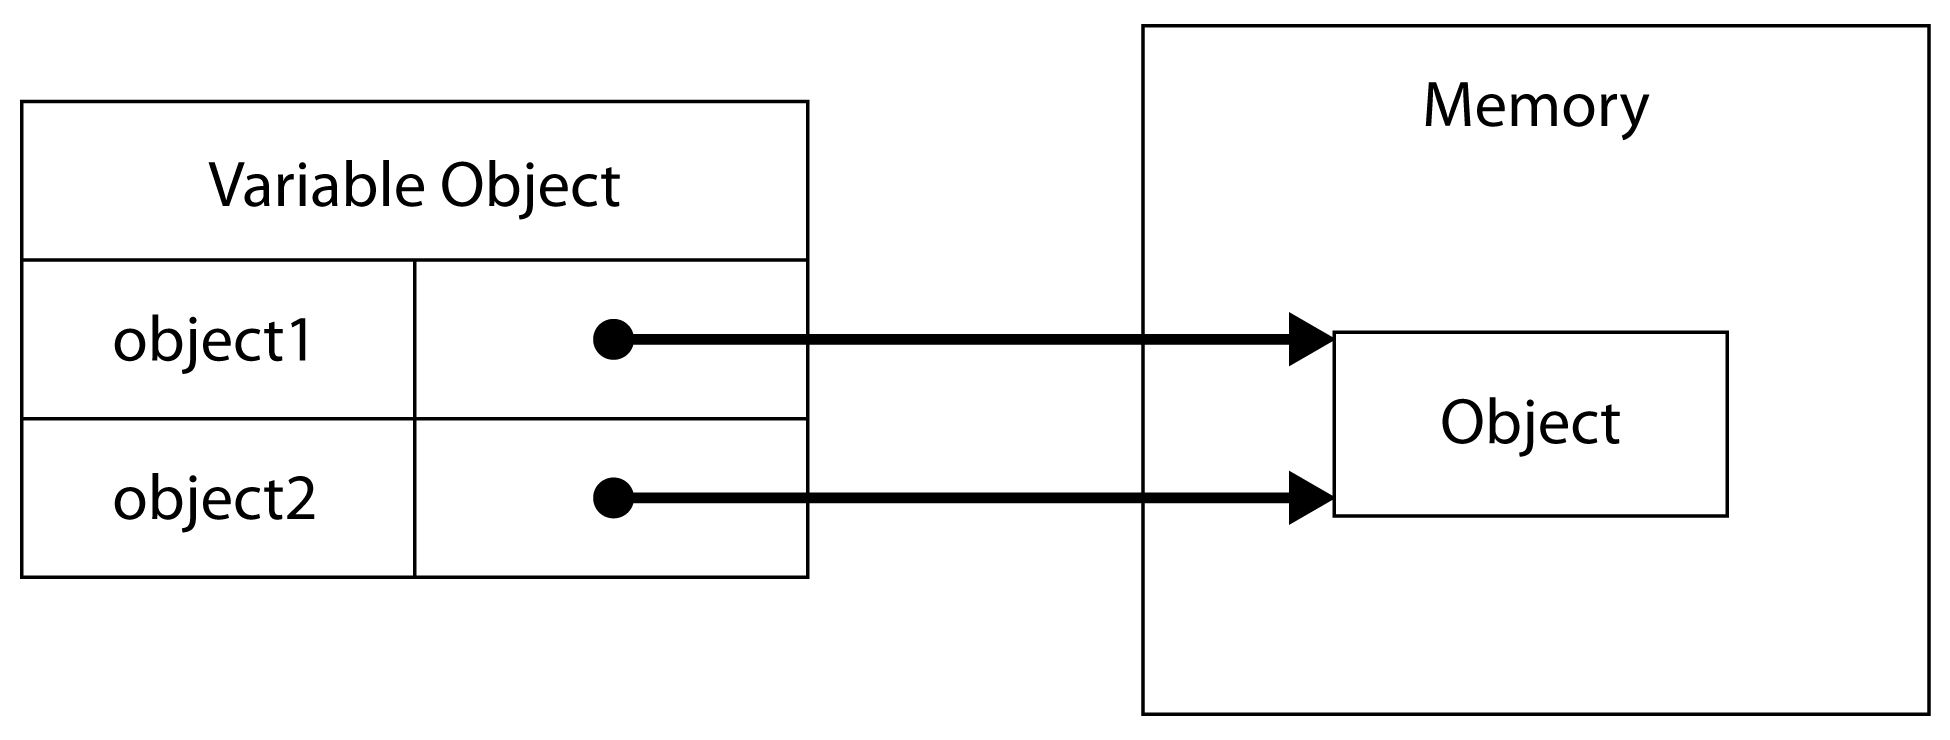 Figure 1-3: Two variables pointing to one object